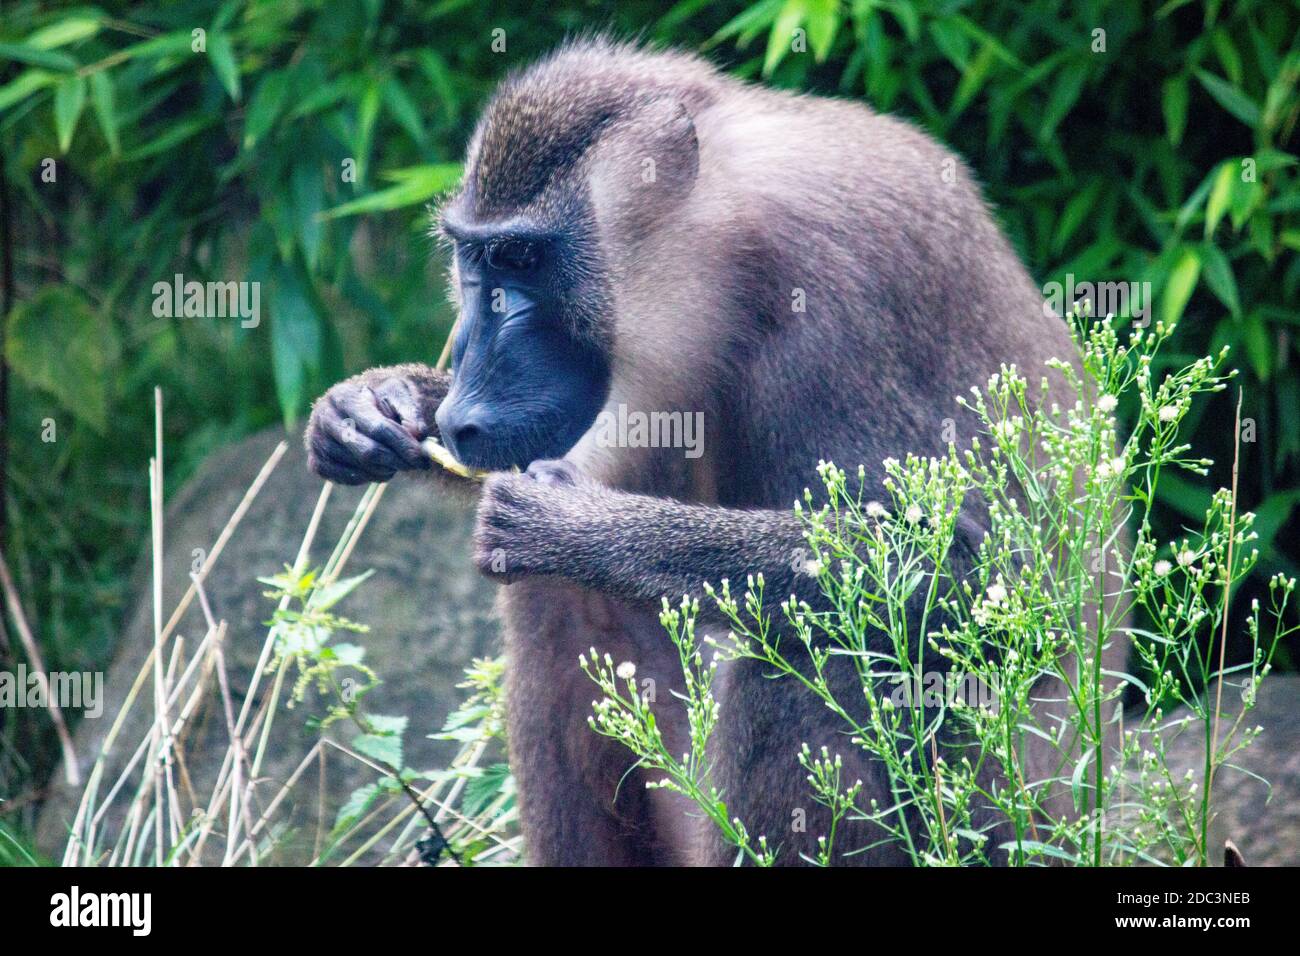 View of a drill while eating. They are primates from the family Cercopithecidae, Mandrillus leucophaeus Stock Photo